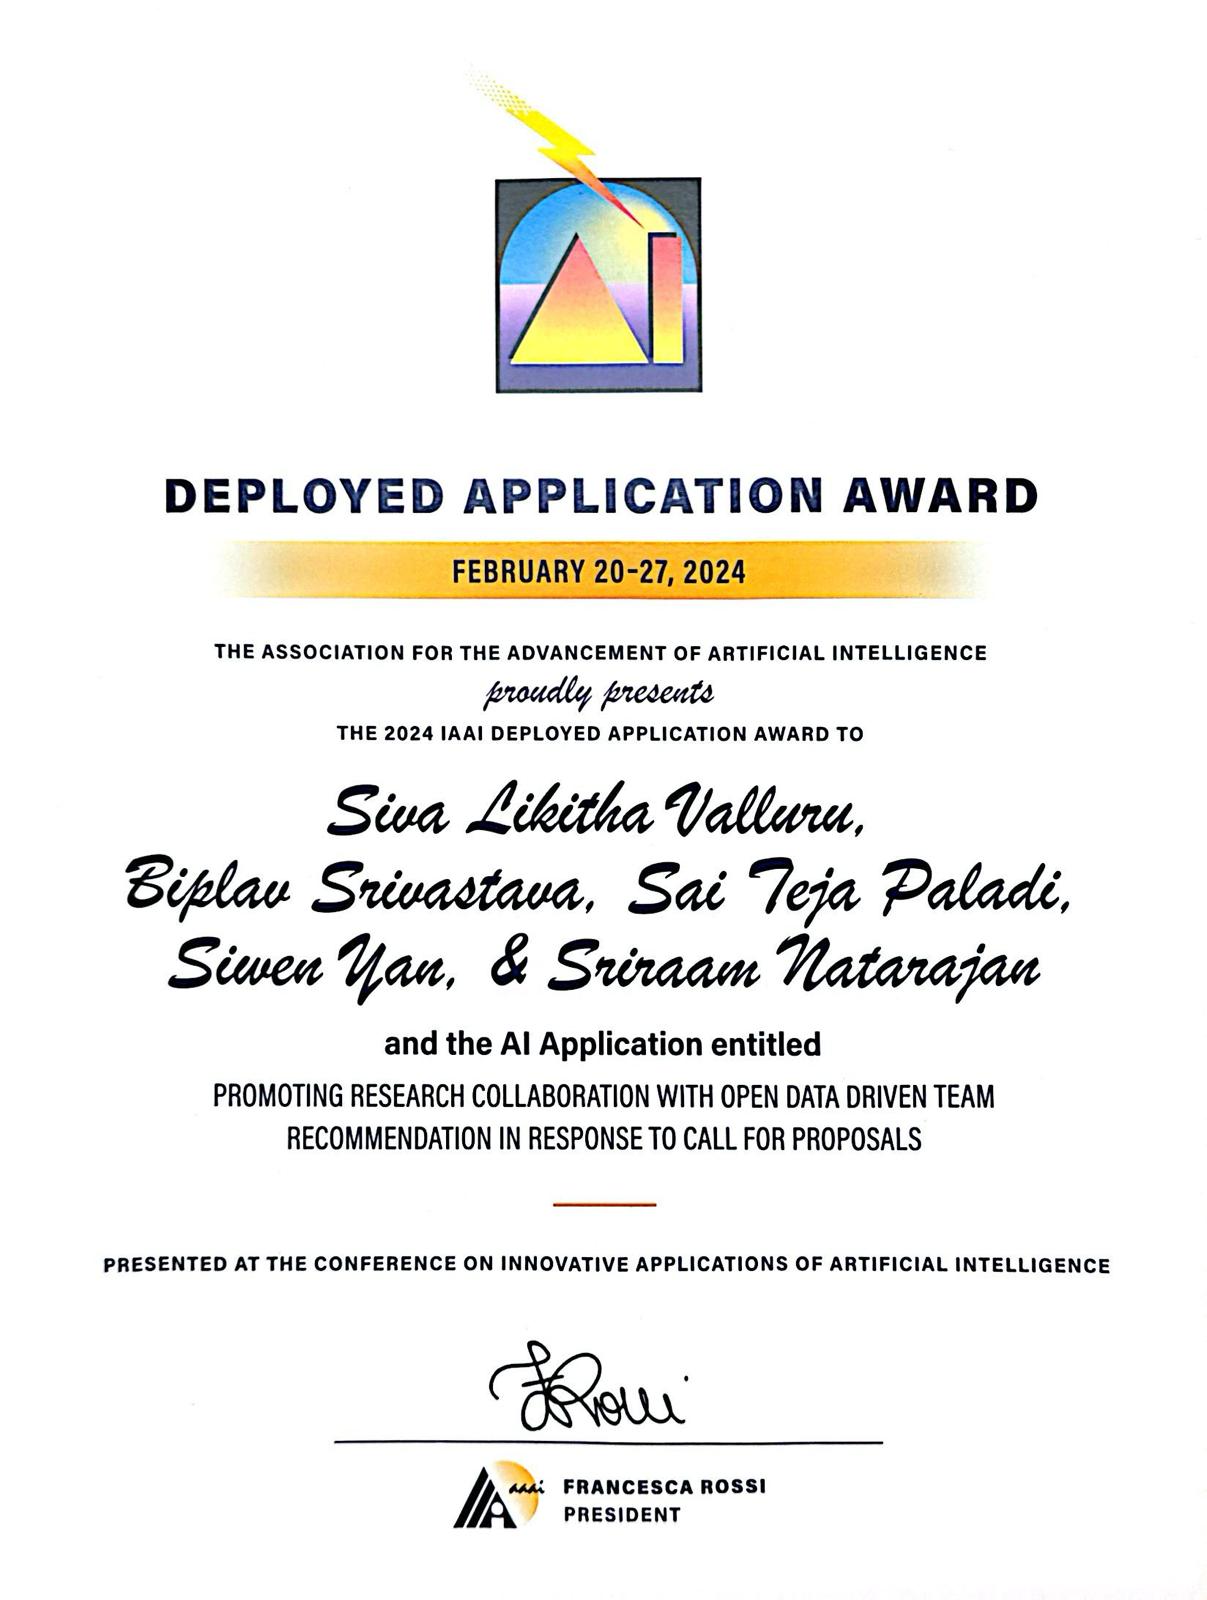 🎉 2024 IAAI Deployed Application Award for our AI application, <i>Promoting Research Collaboration with Open Data Driven Team Recommendation in Response to Call for Proposals</i> 🎉